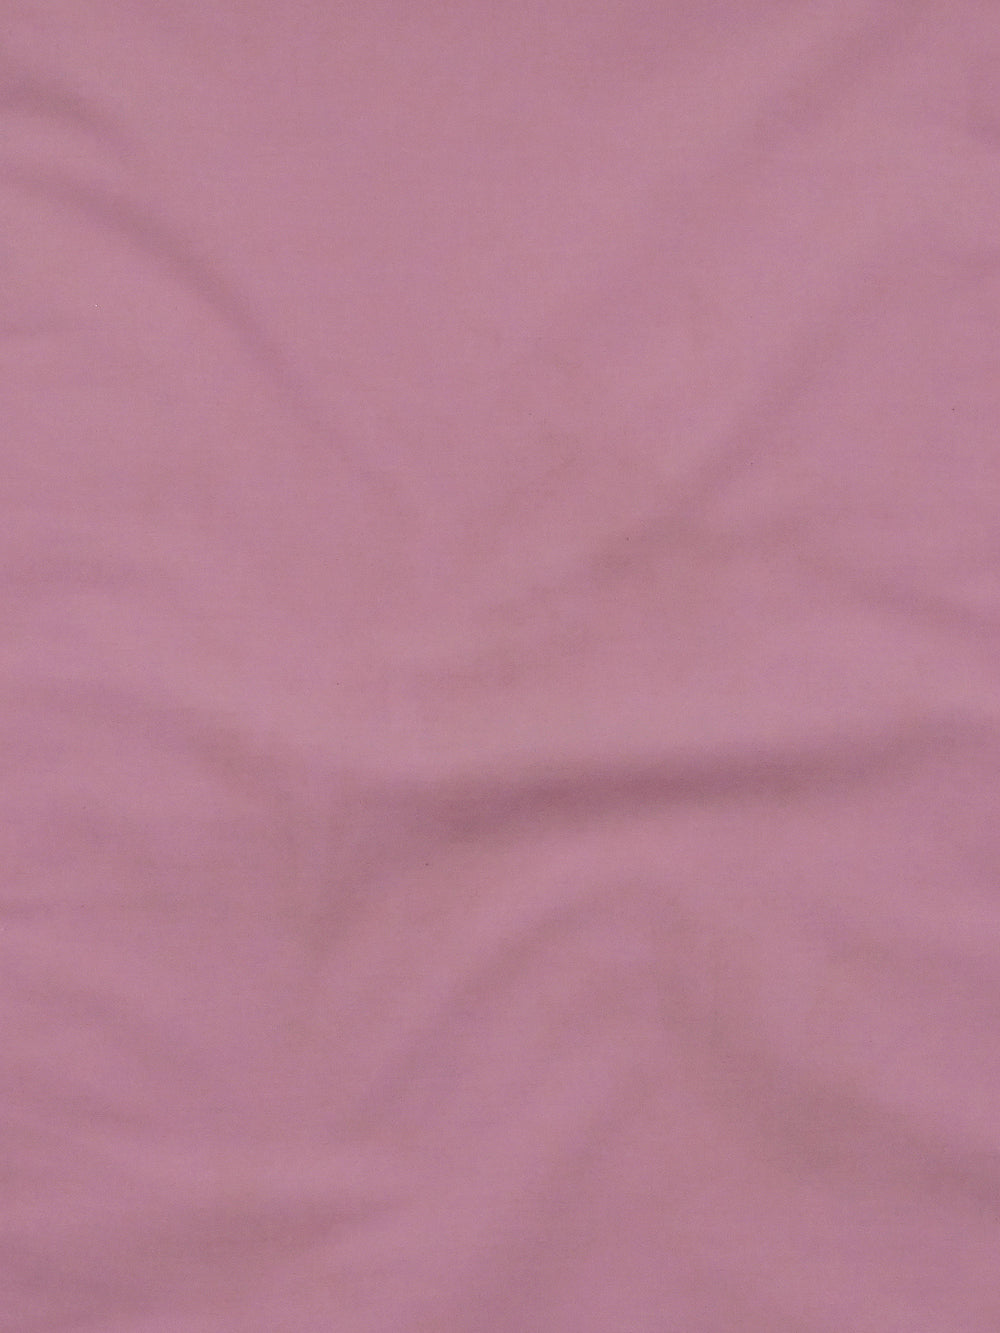 C-28 Pink Shade Solid Dyed Cotton Cambric Fabric